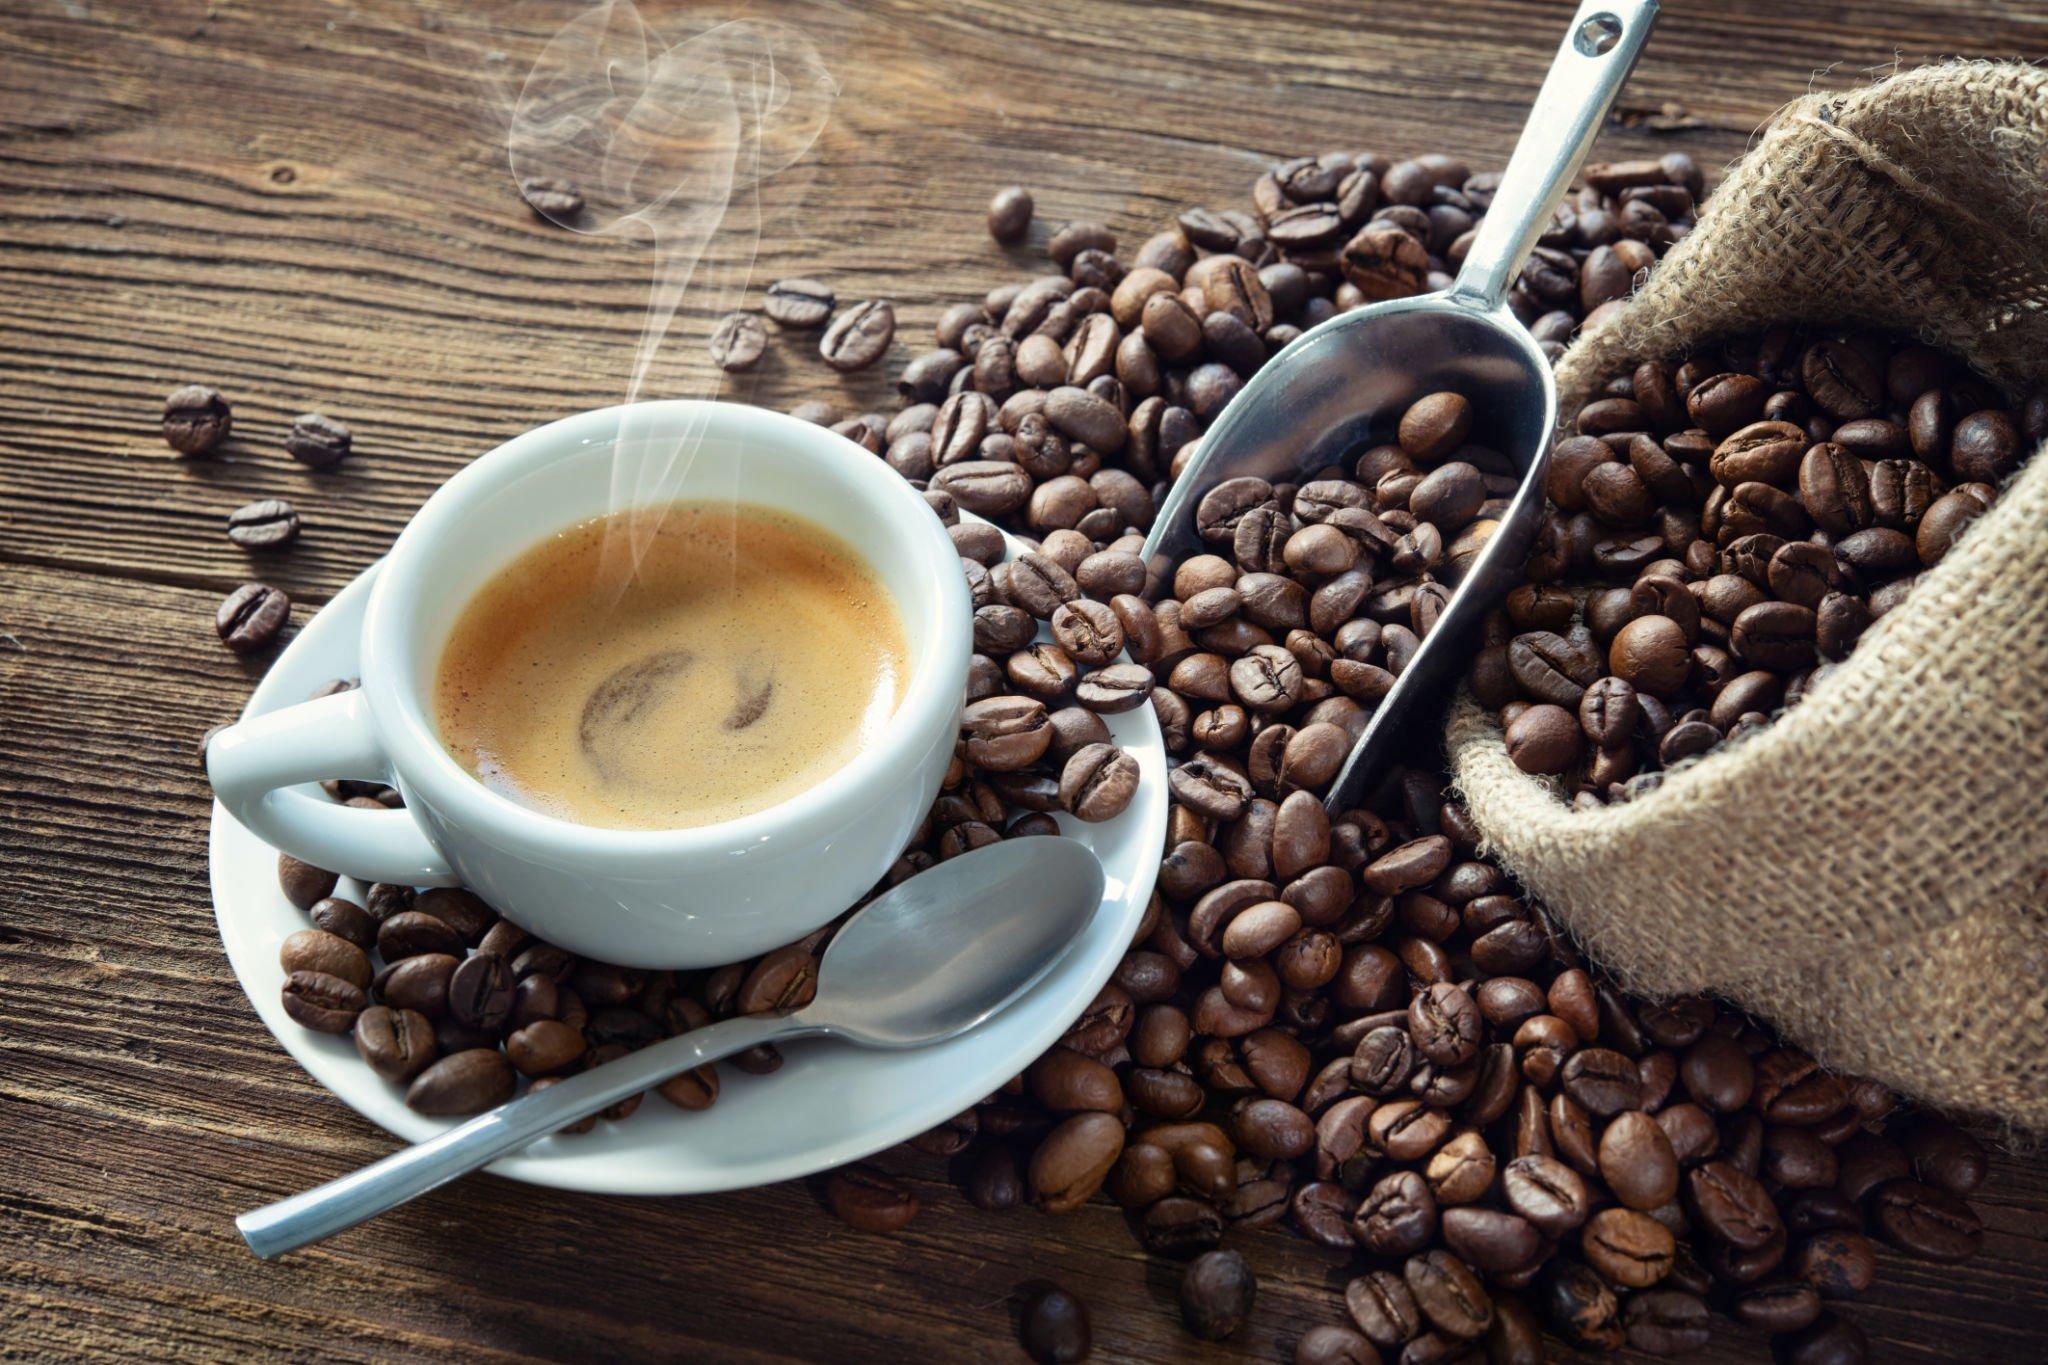 What Coffee Has The Most Caffeine?